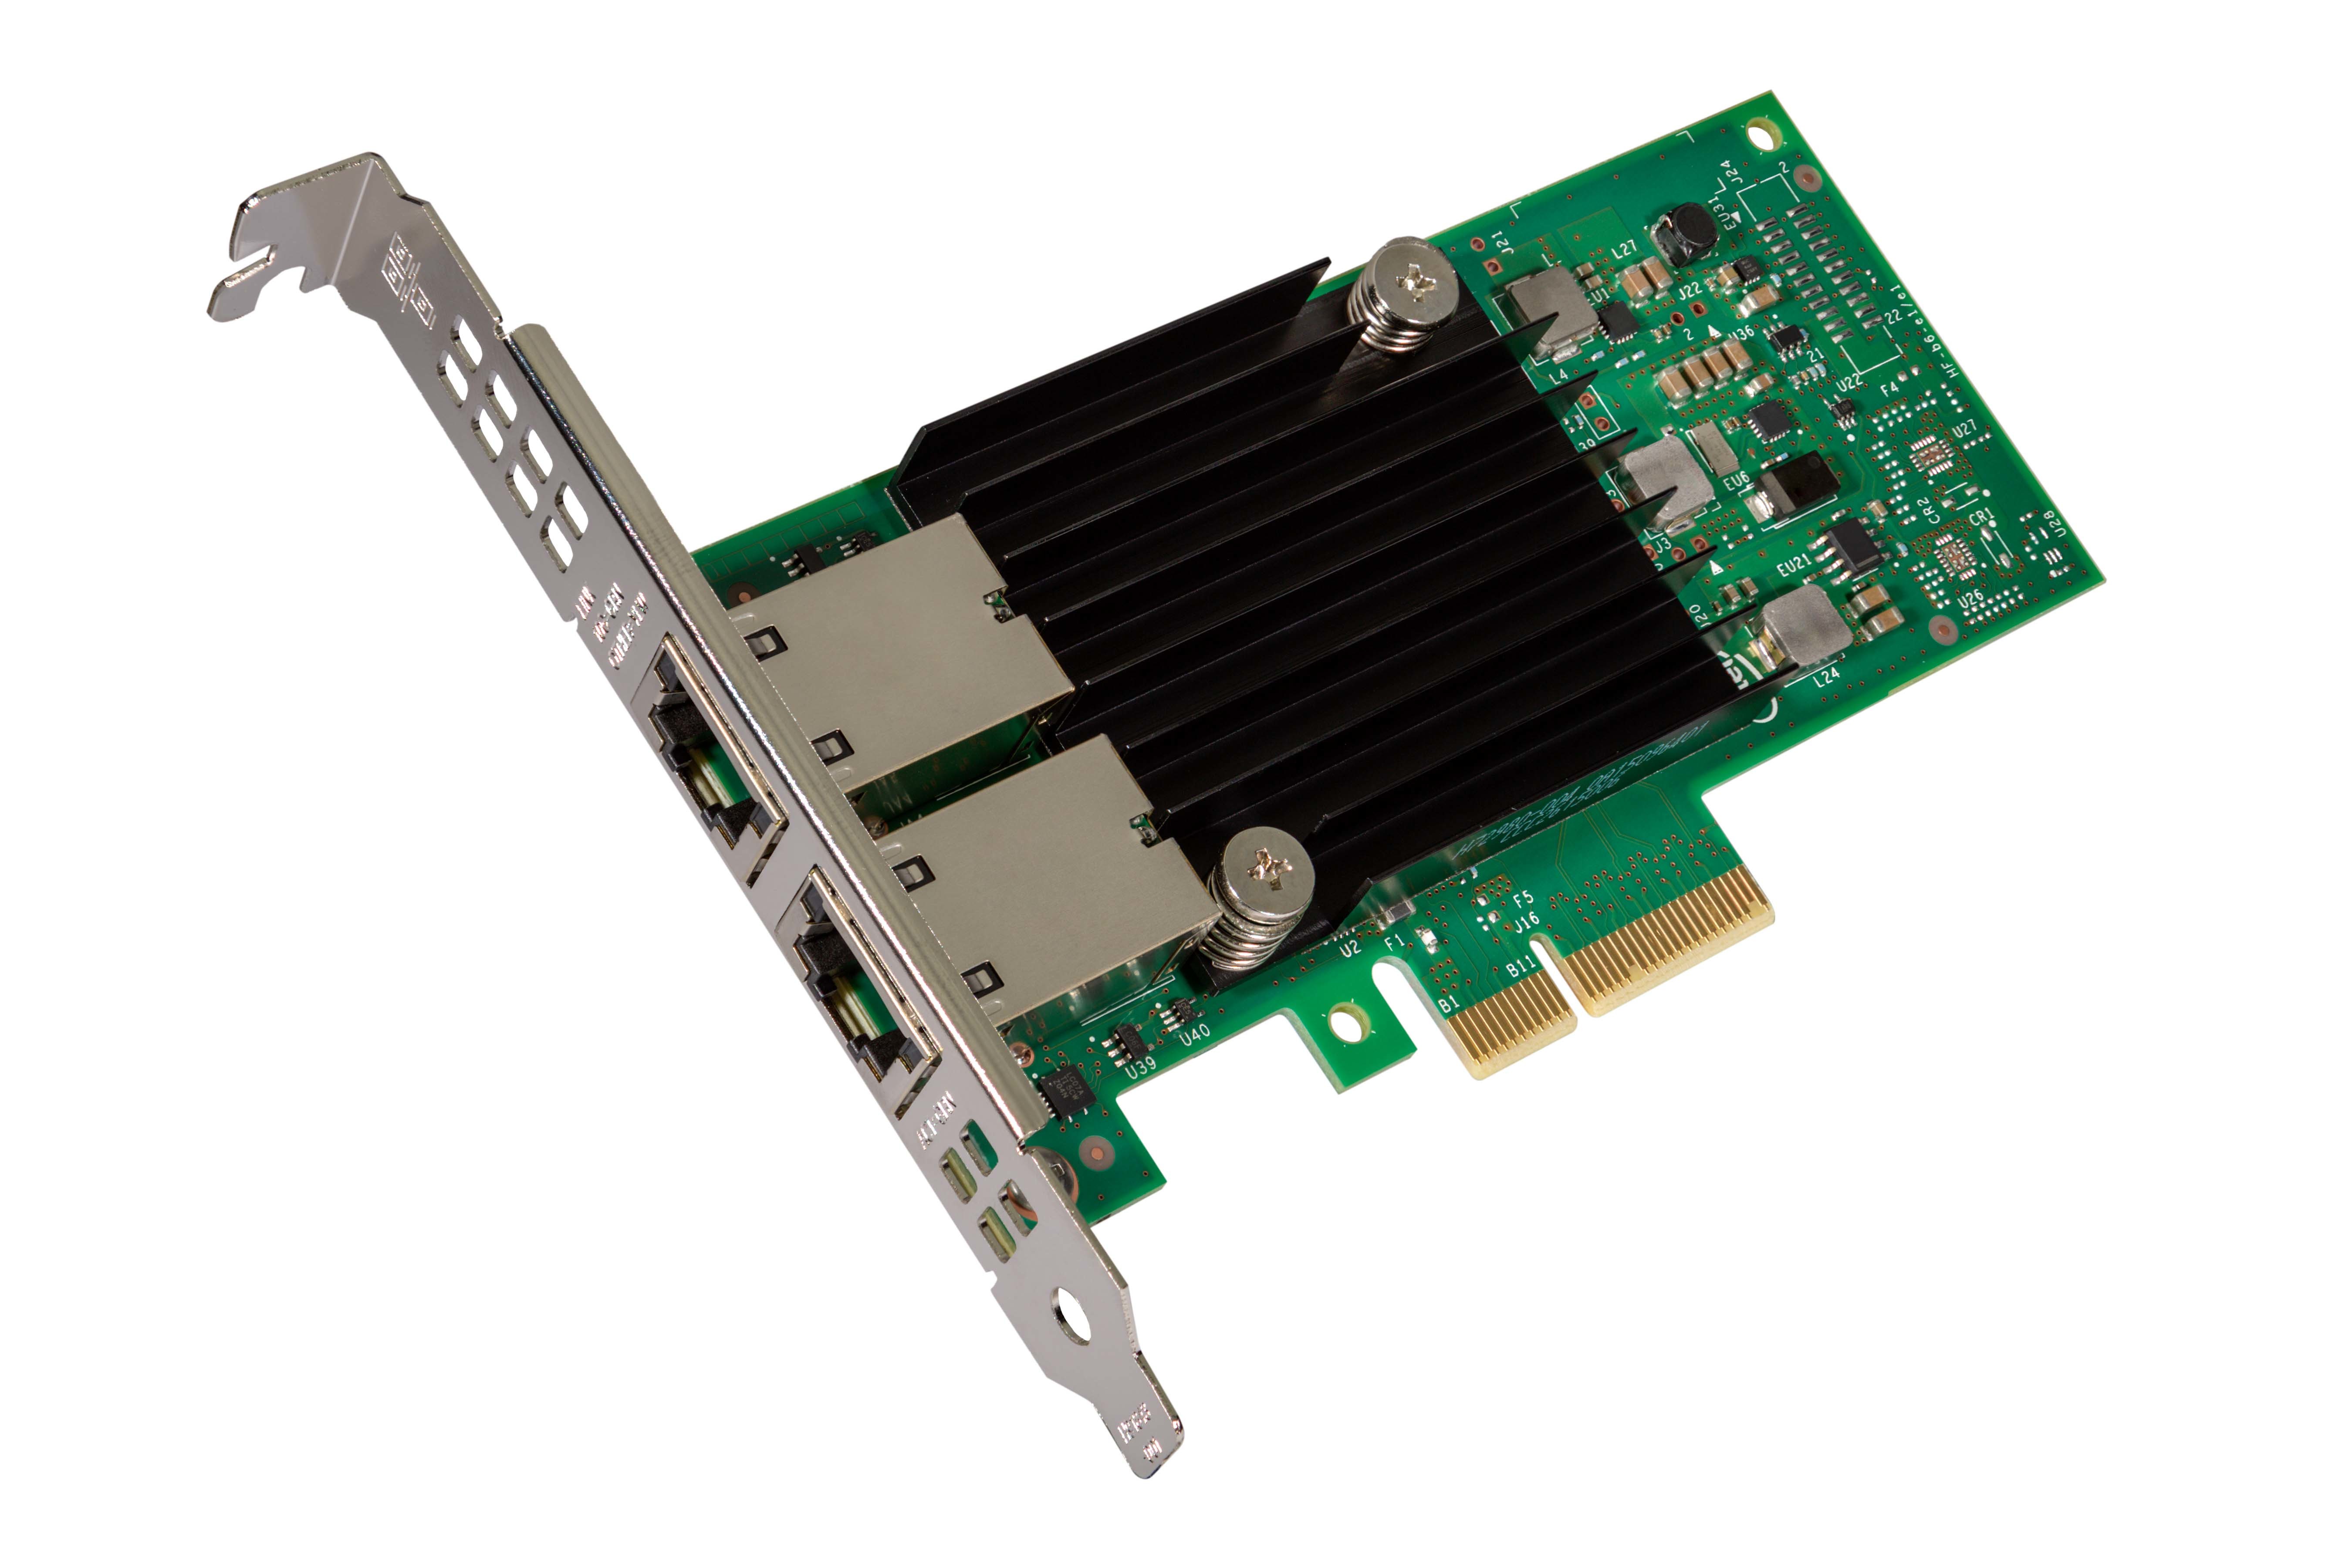 Intel Ethernet Converged Network Adapter X550-T2 - image 2 of 2